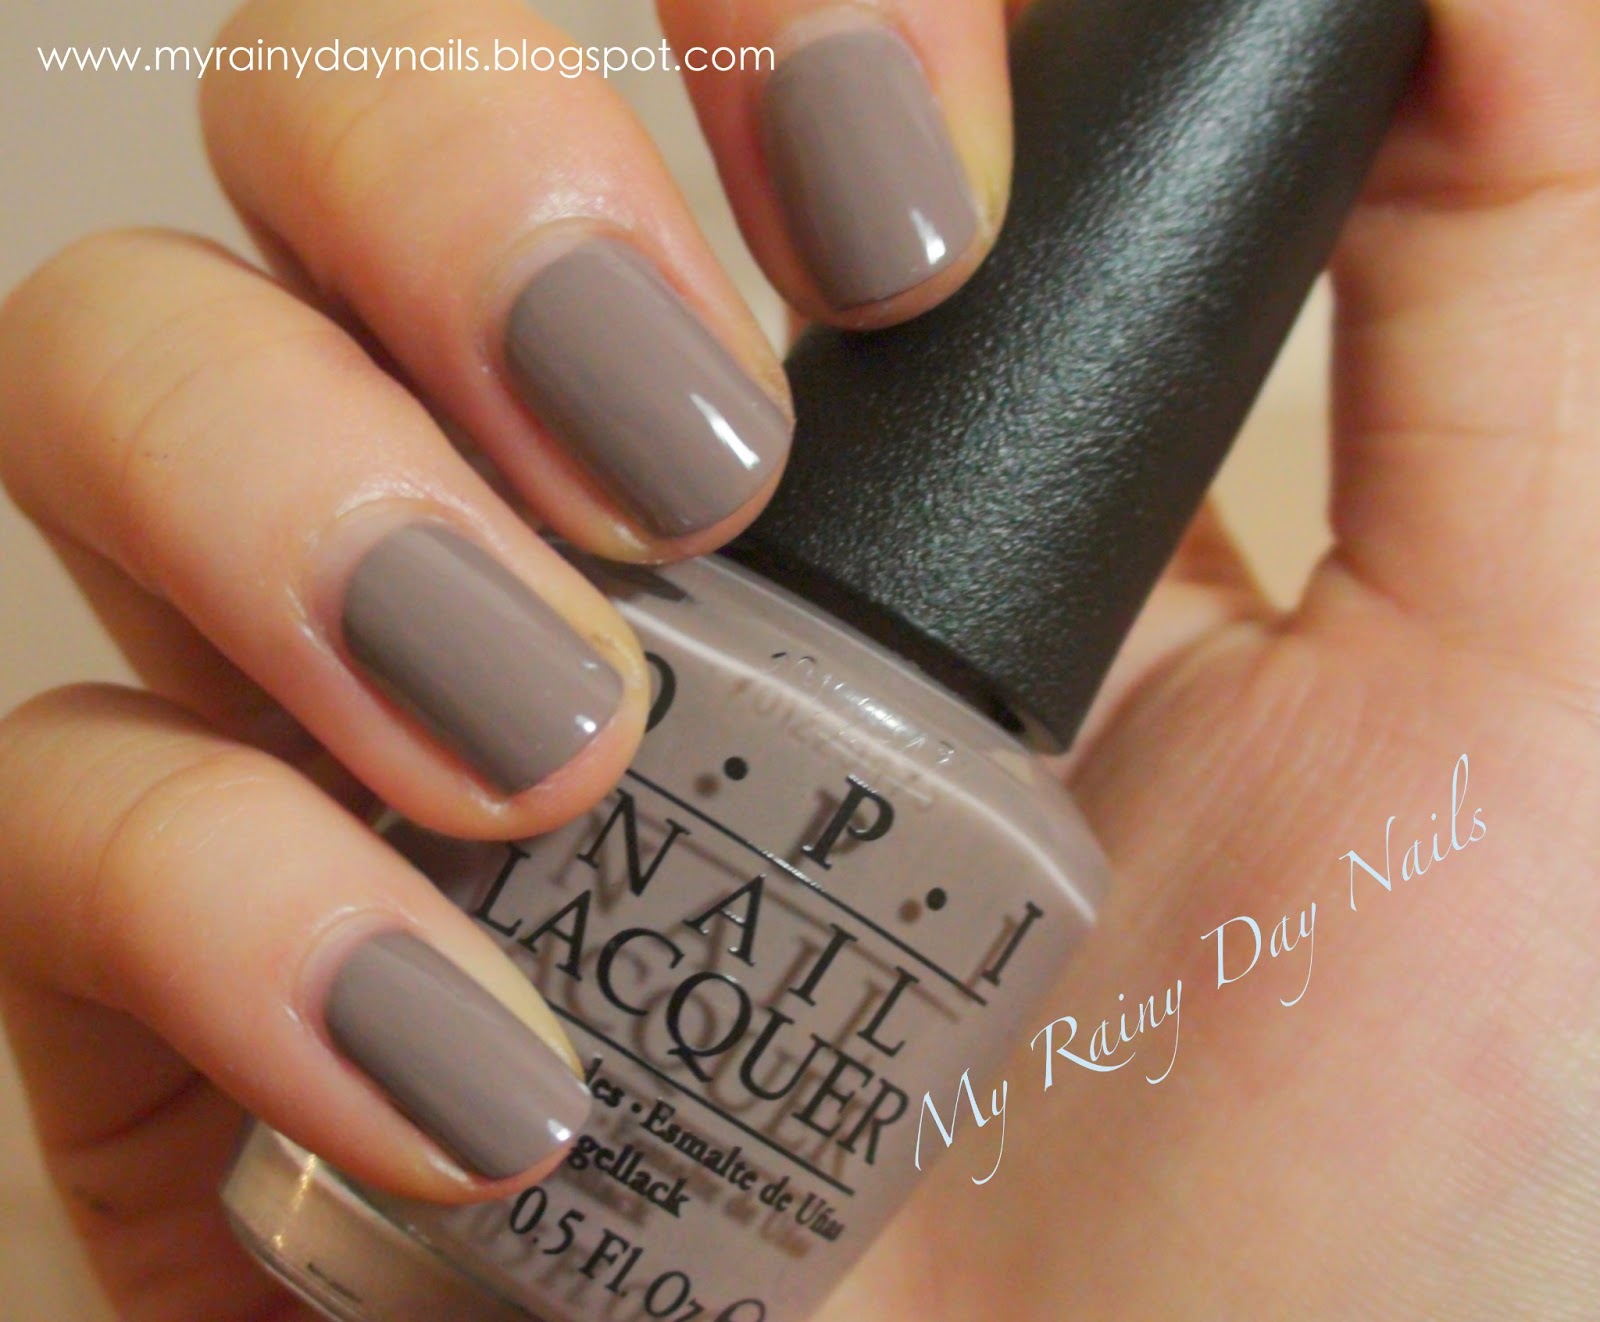 2. OPI Nail Lacquer in "Berlin There Done That" - wide 5